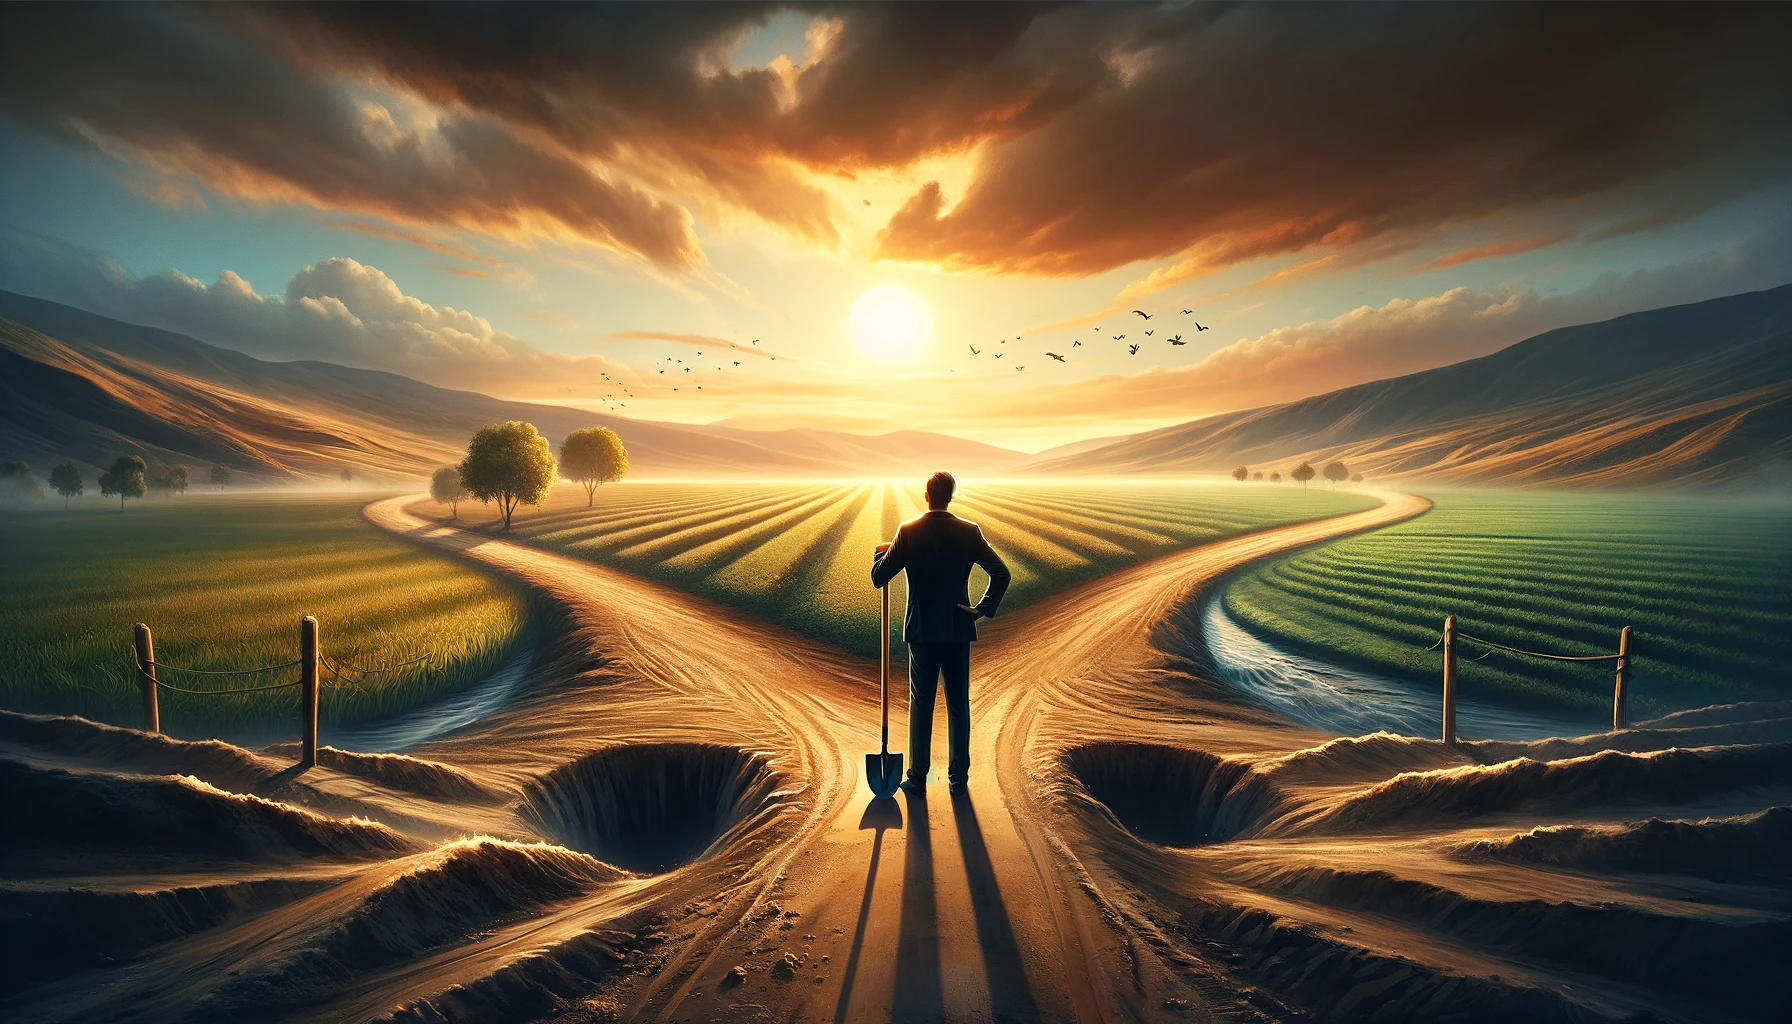 At a literal crossroads, an individual pauses to choose between a familiar, unfruitful path and a new, uncertain direction leading to potential growth, under the symbolic light of a rising or setting sun.